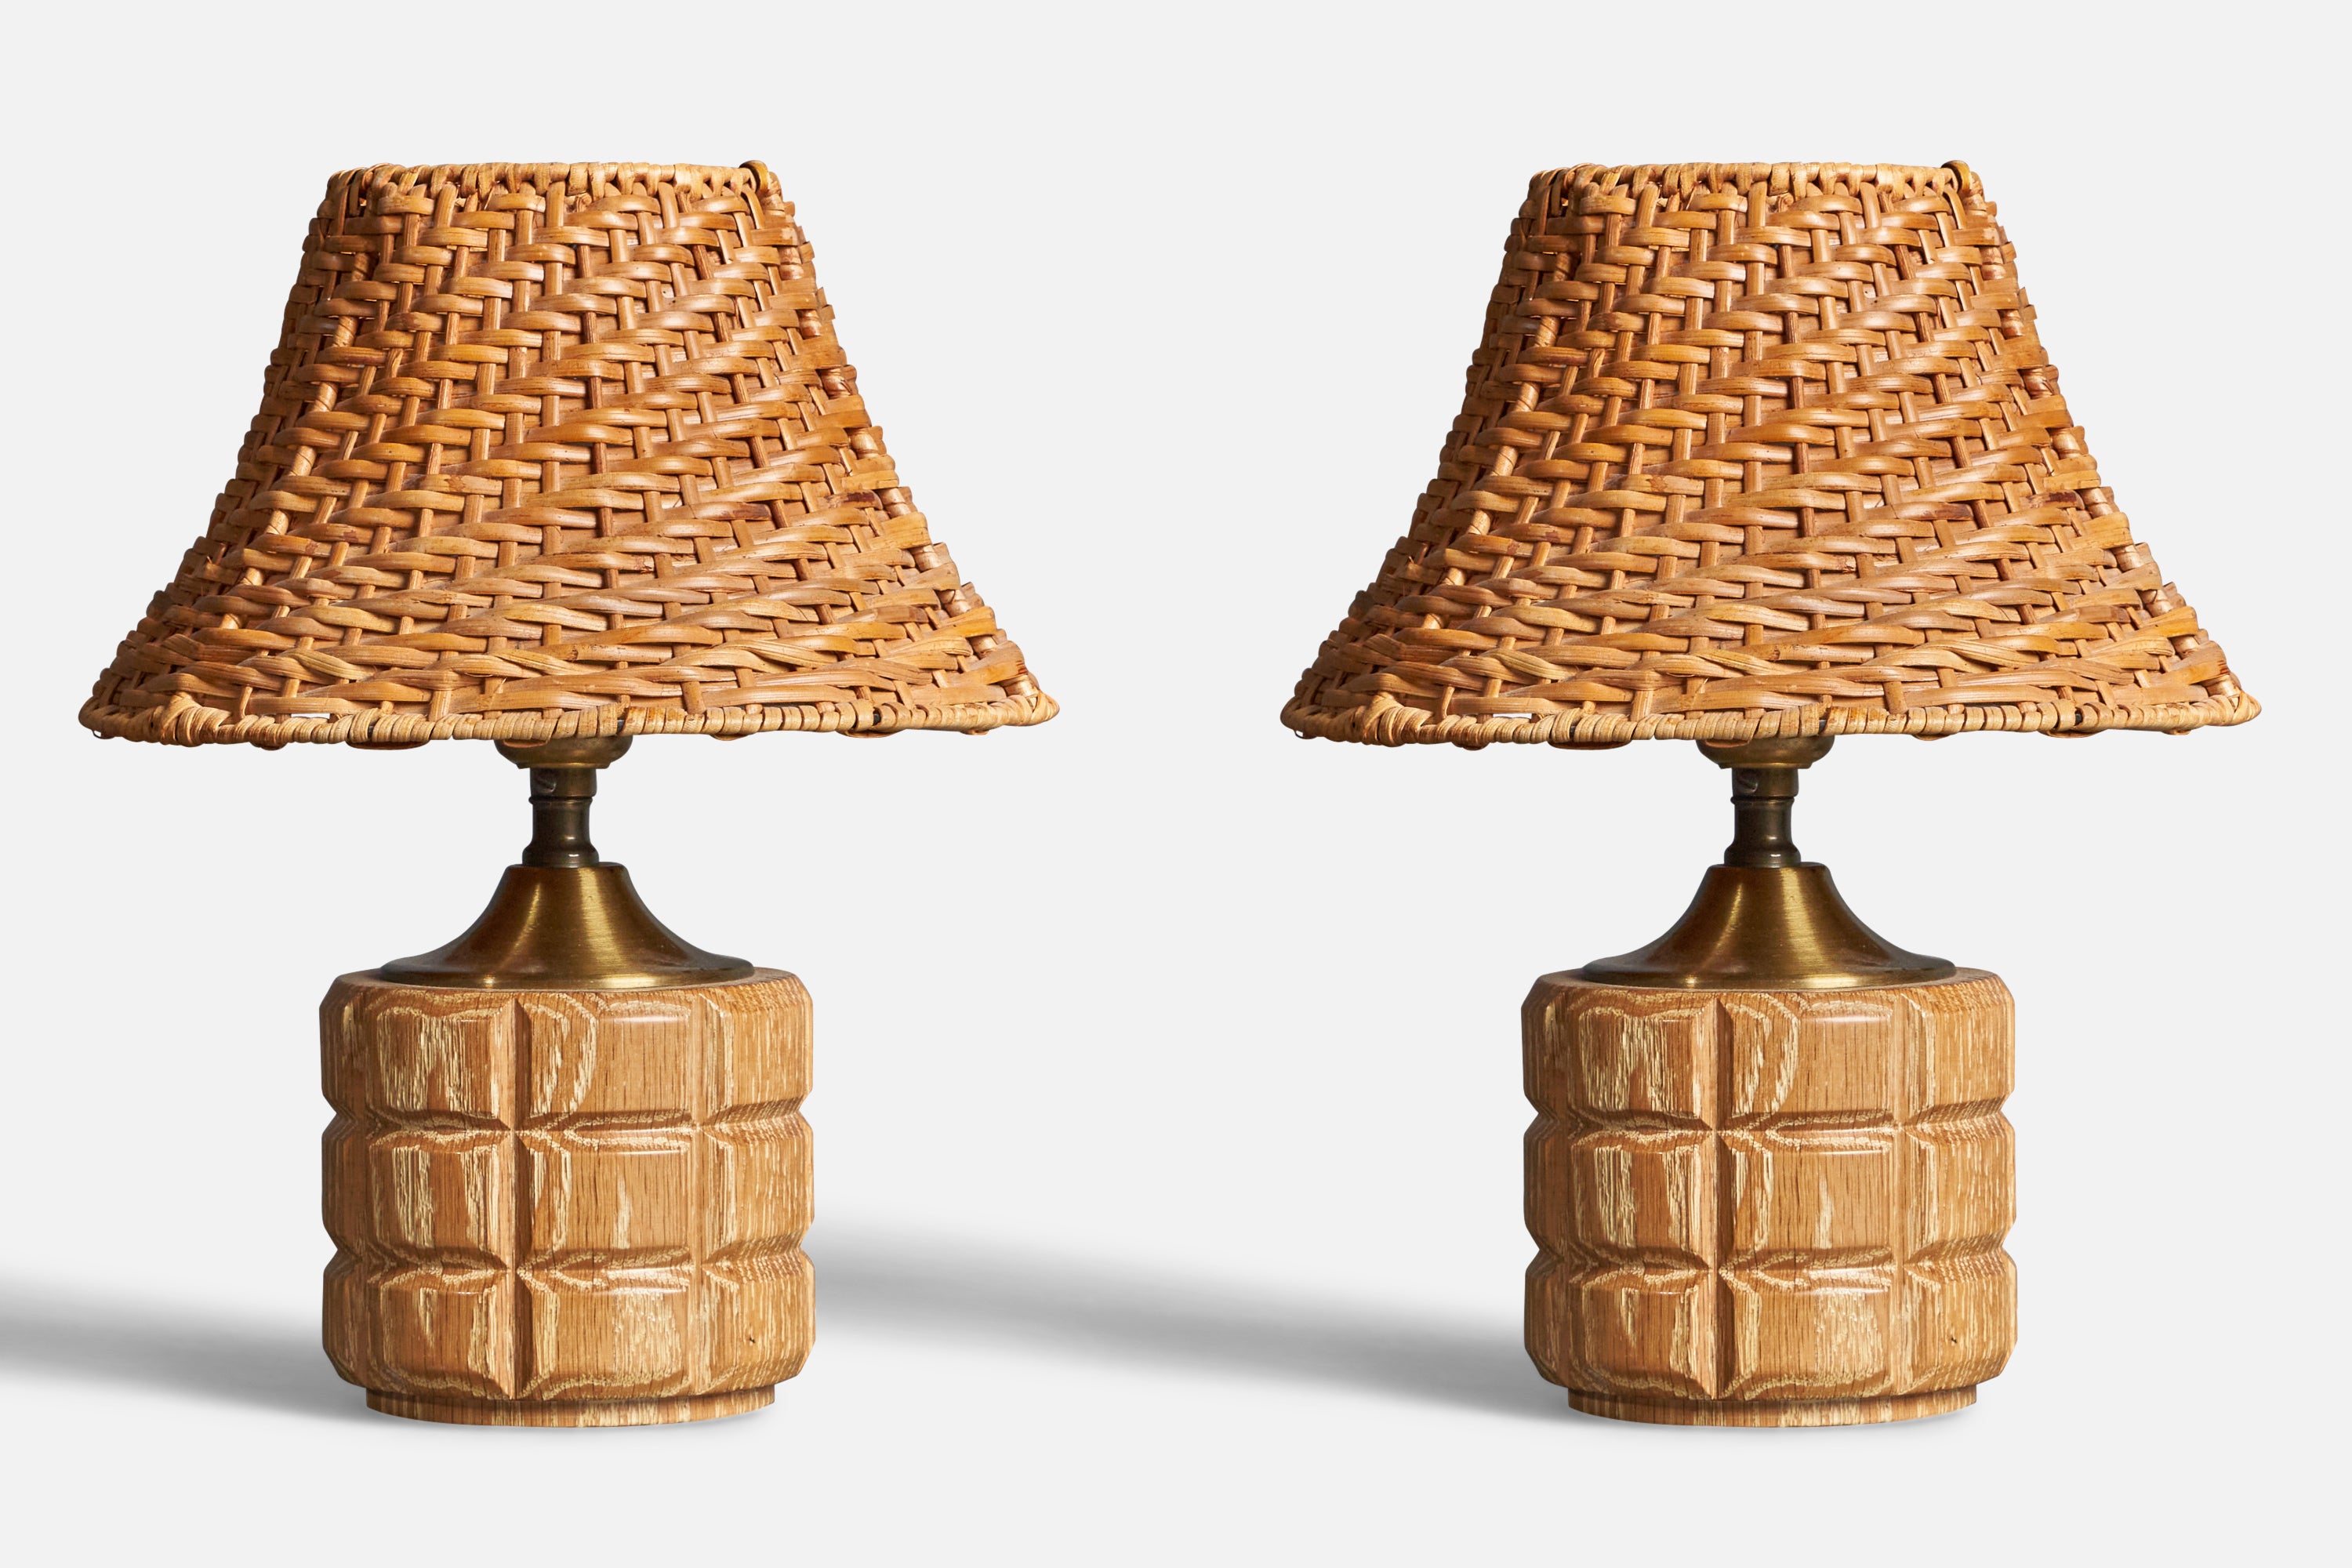 American Craft, Sculptural Table Lamps, Oak, Rattan, Brass America, 1960s For Sale